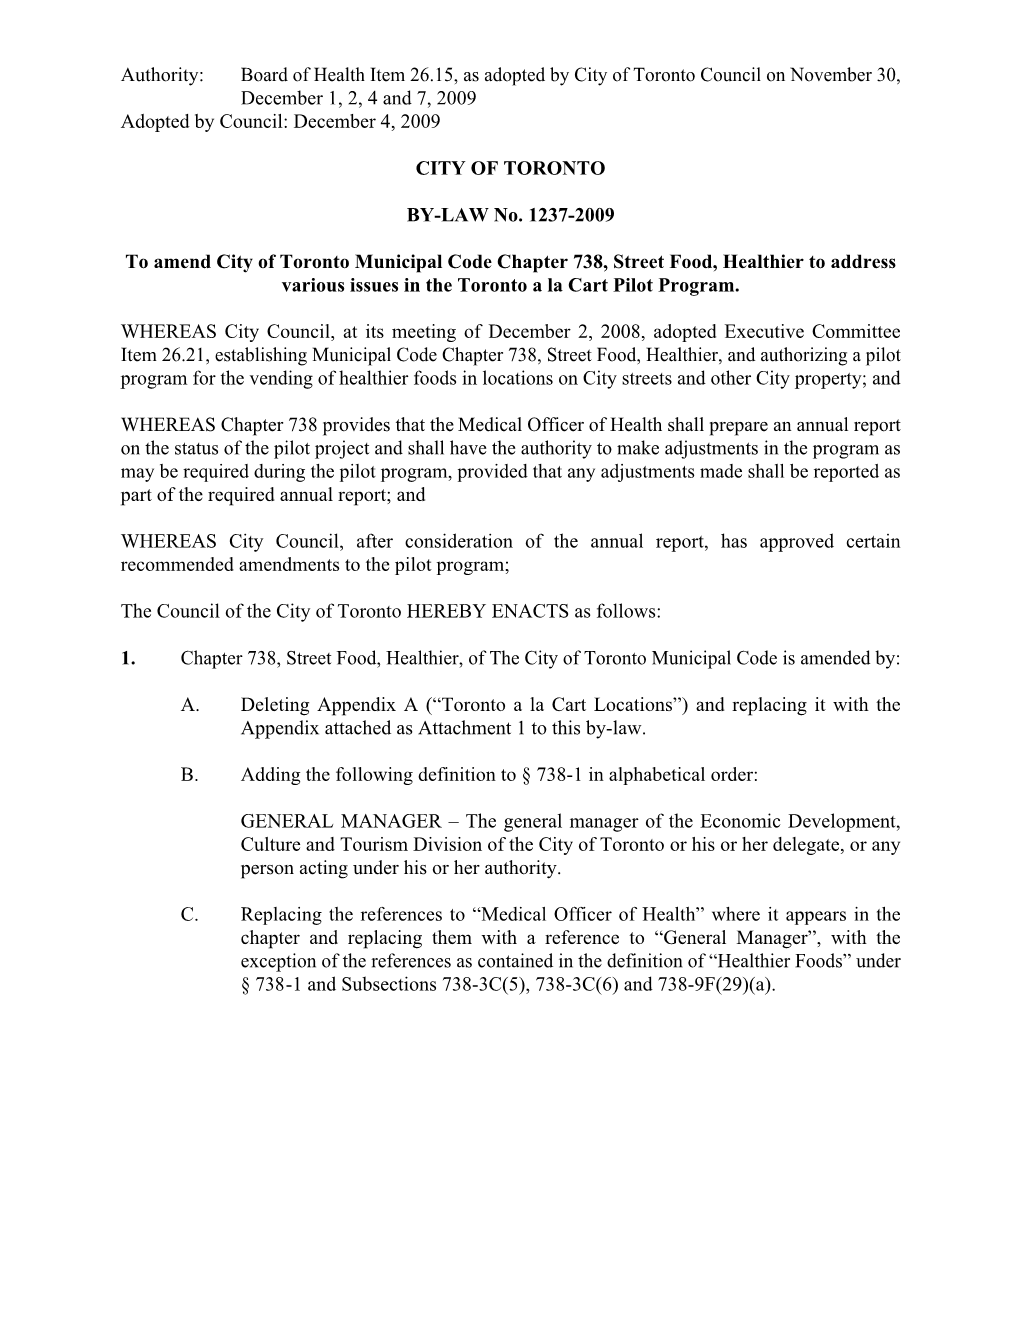 Authority: Board of Health Item 26.15, As Adopted by City of Toronto Council on November 30, December 1, 2, 4 and 7, 2009 Adopted by Council: December 4, 2009